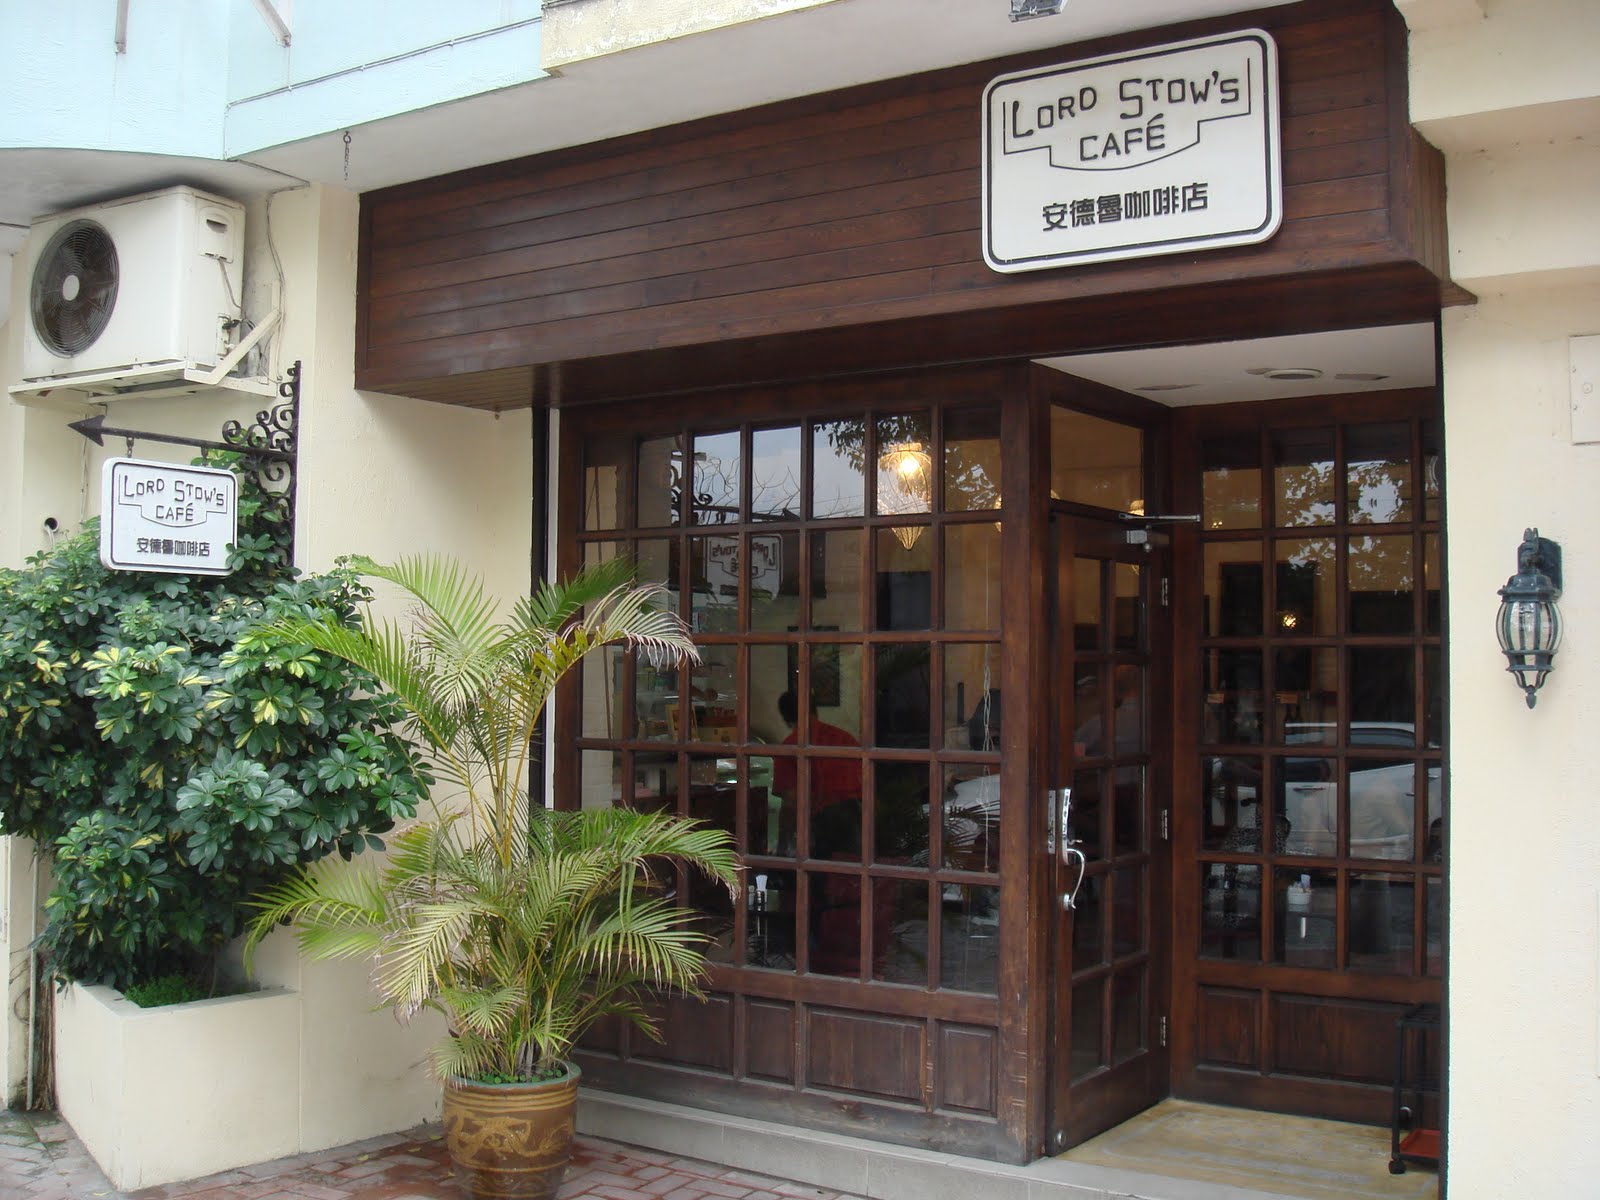 [DSC04178+-+Lord+Stow's+Cafe.JPG]